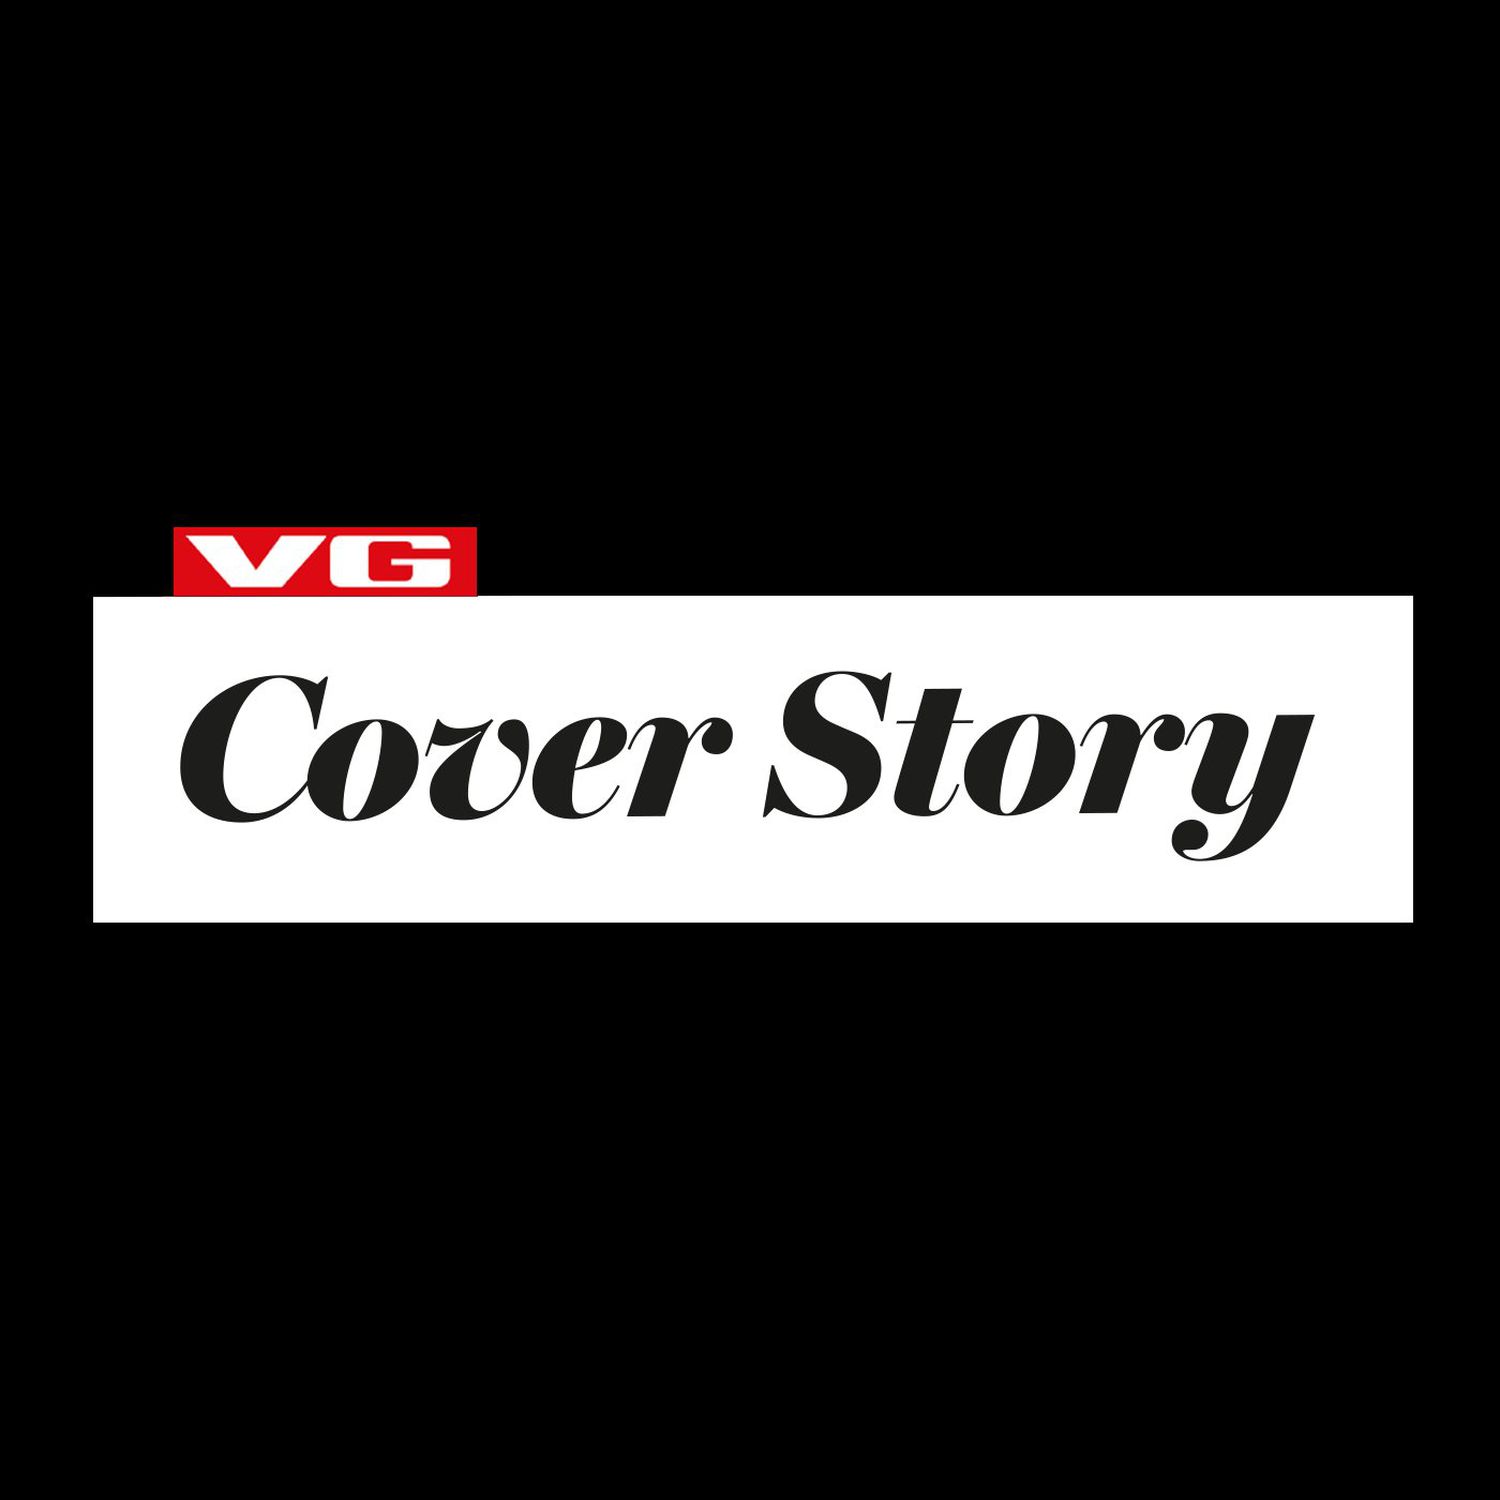 Coverstory